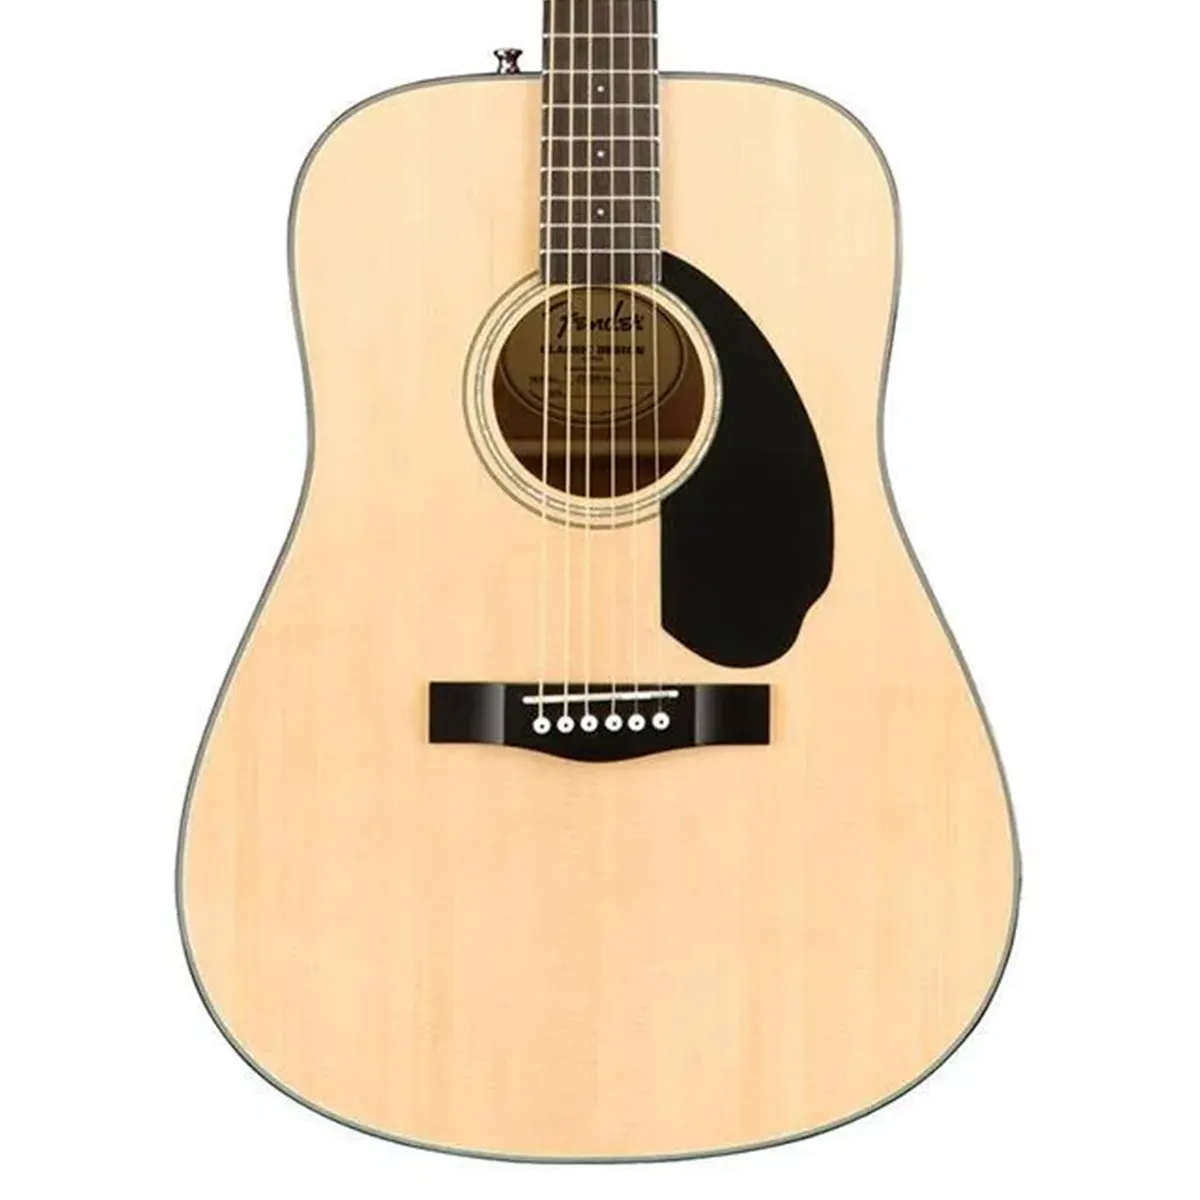 Fender CD-60S Acoustic Guitar Review: Impressive Performance, Affordable Price